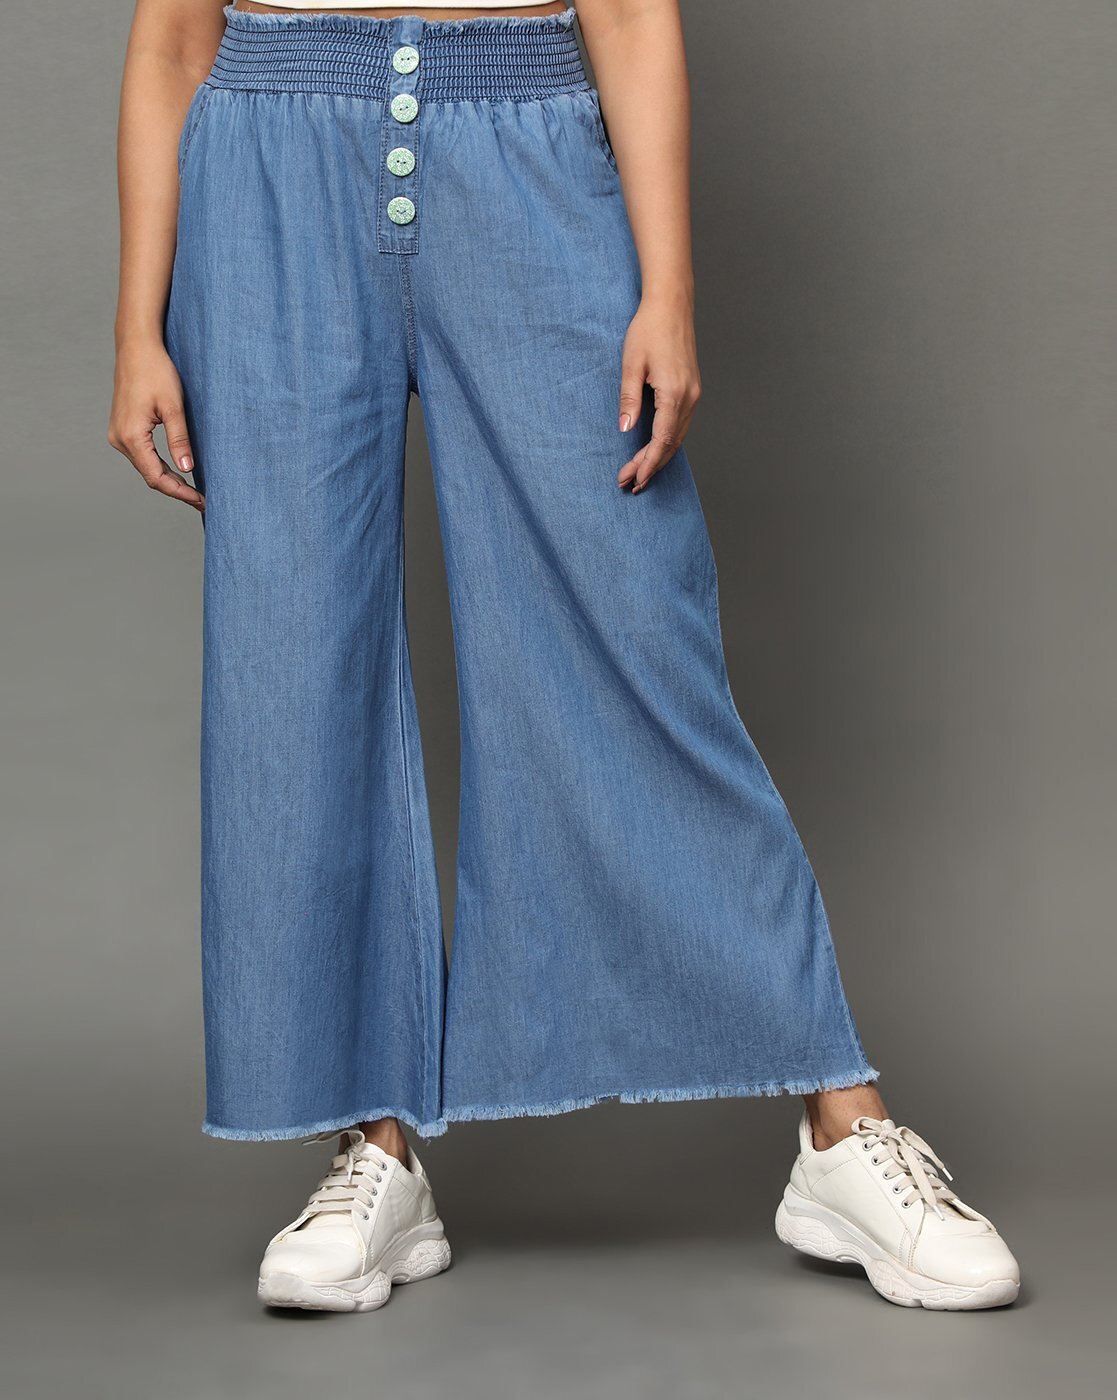 Buy TNQ Women's Stylish Cotton Denim Trousers Wide Leg Palazzo Pant with  Belt Free Size Full Length (Dark Blue buttons style) at Amazon.in